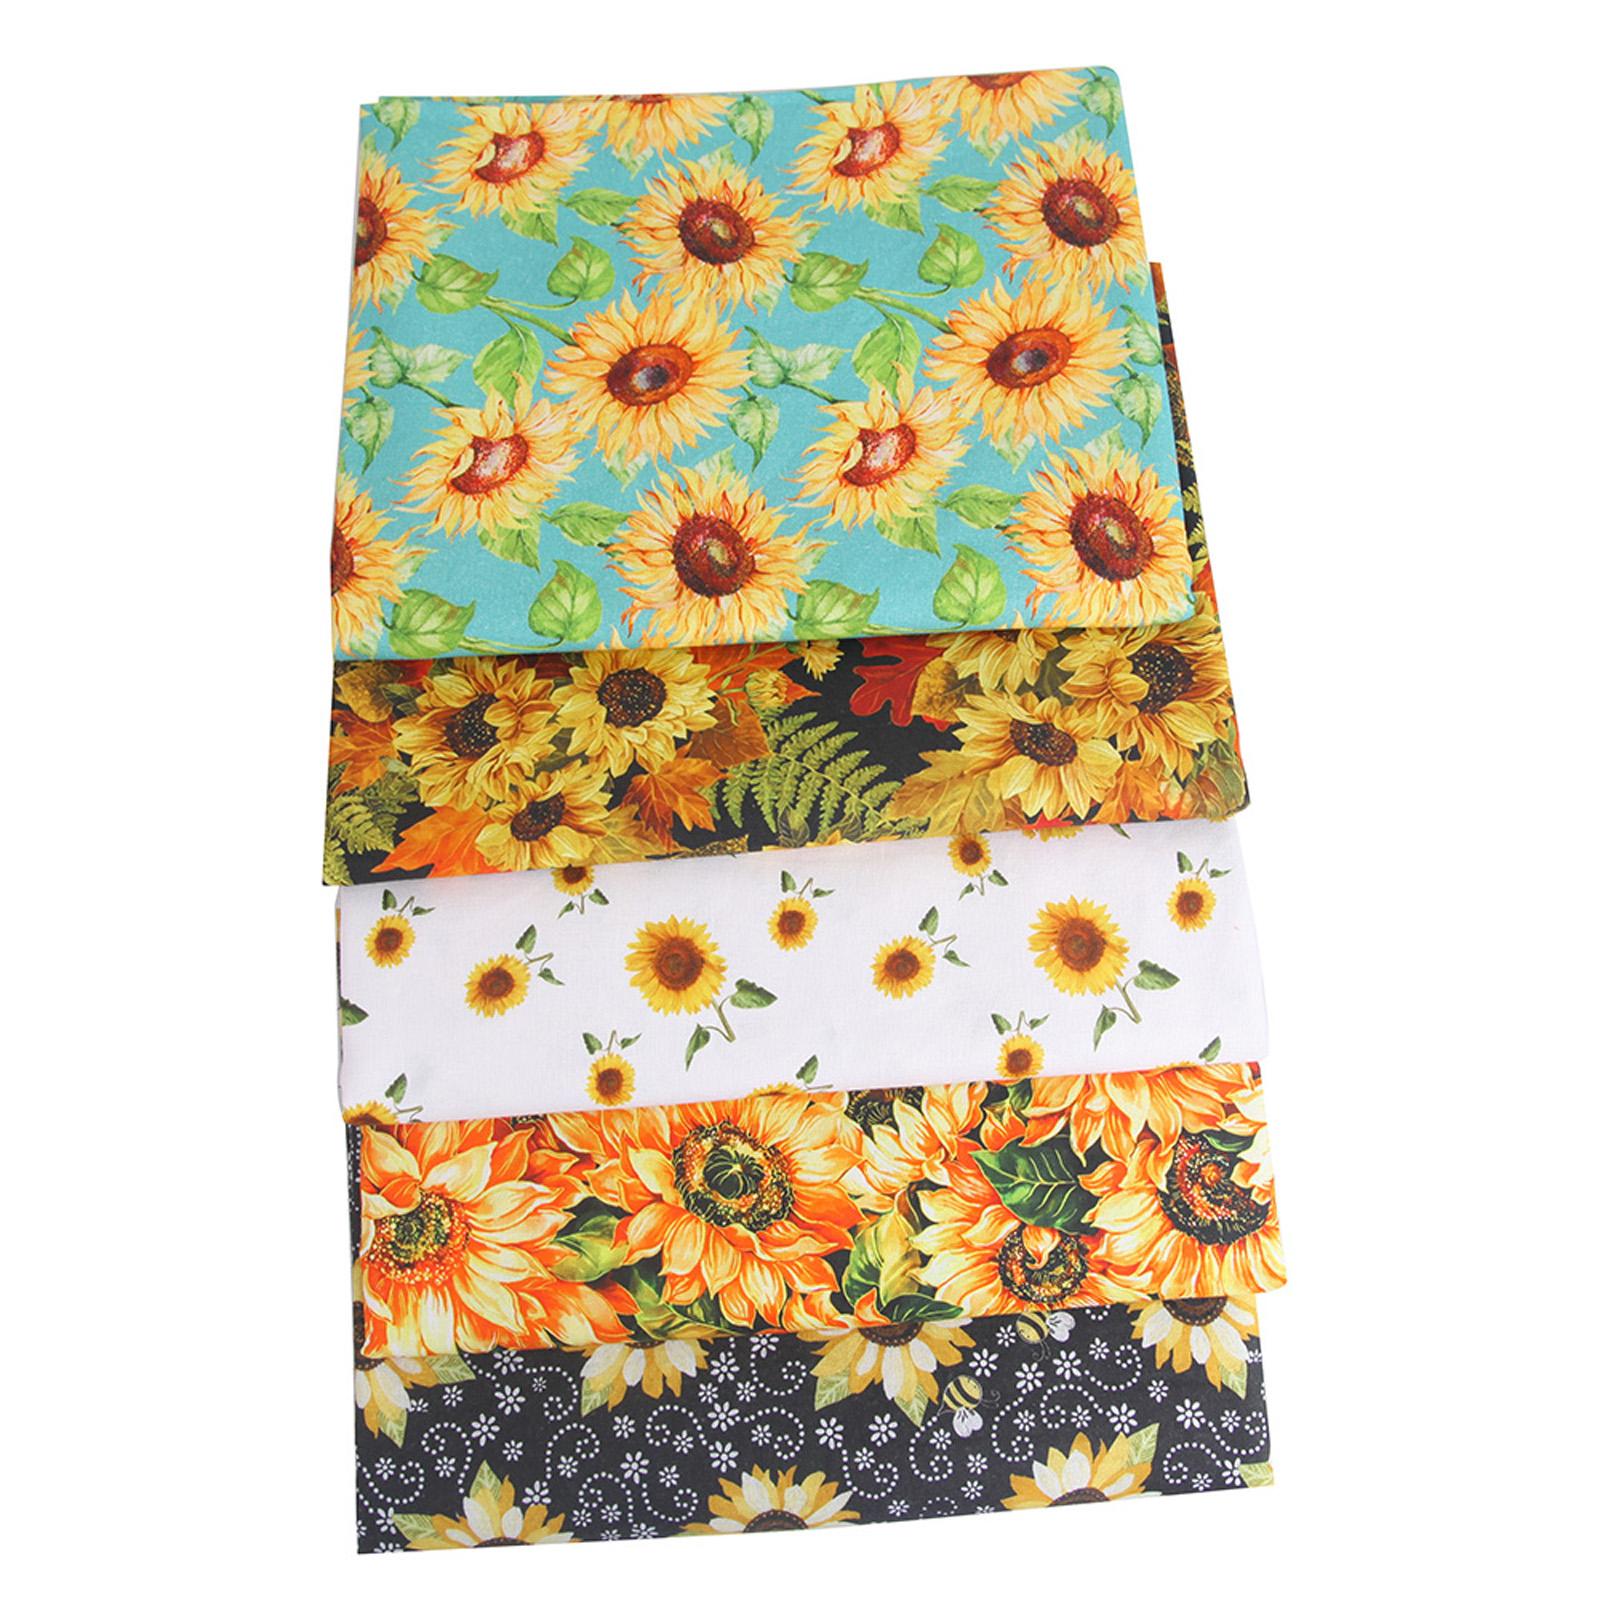 10 Pieces Autumn Fabric Sunflower Pattern Textile Material for DIY Crafting